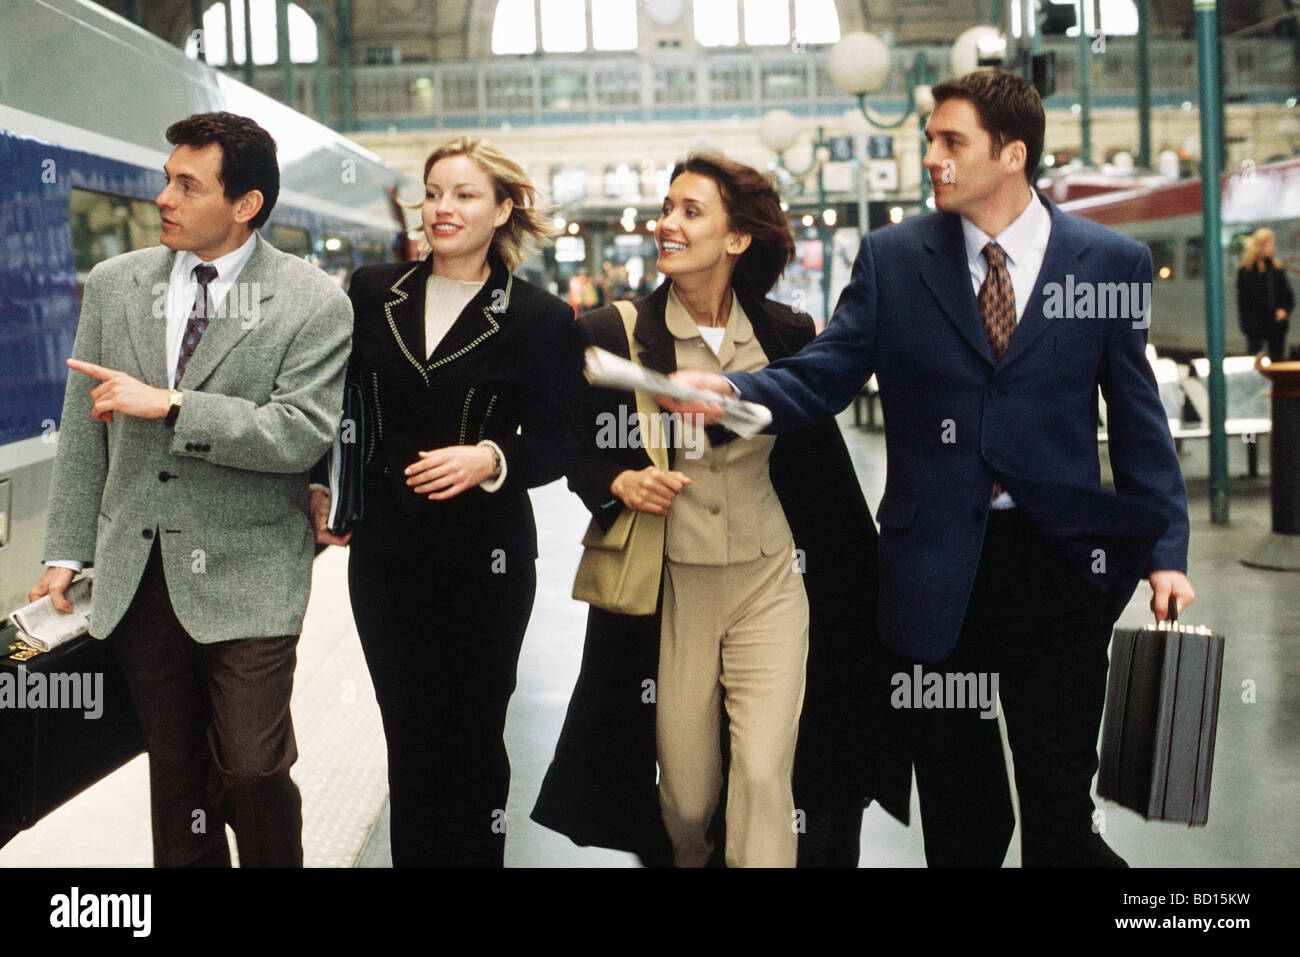 Business associates hurrying together down train platform looking for rail car Stock Photo